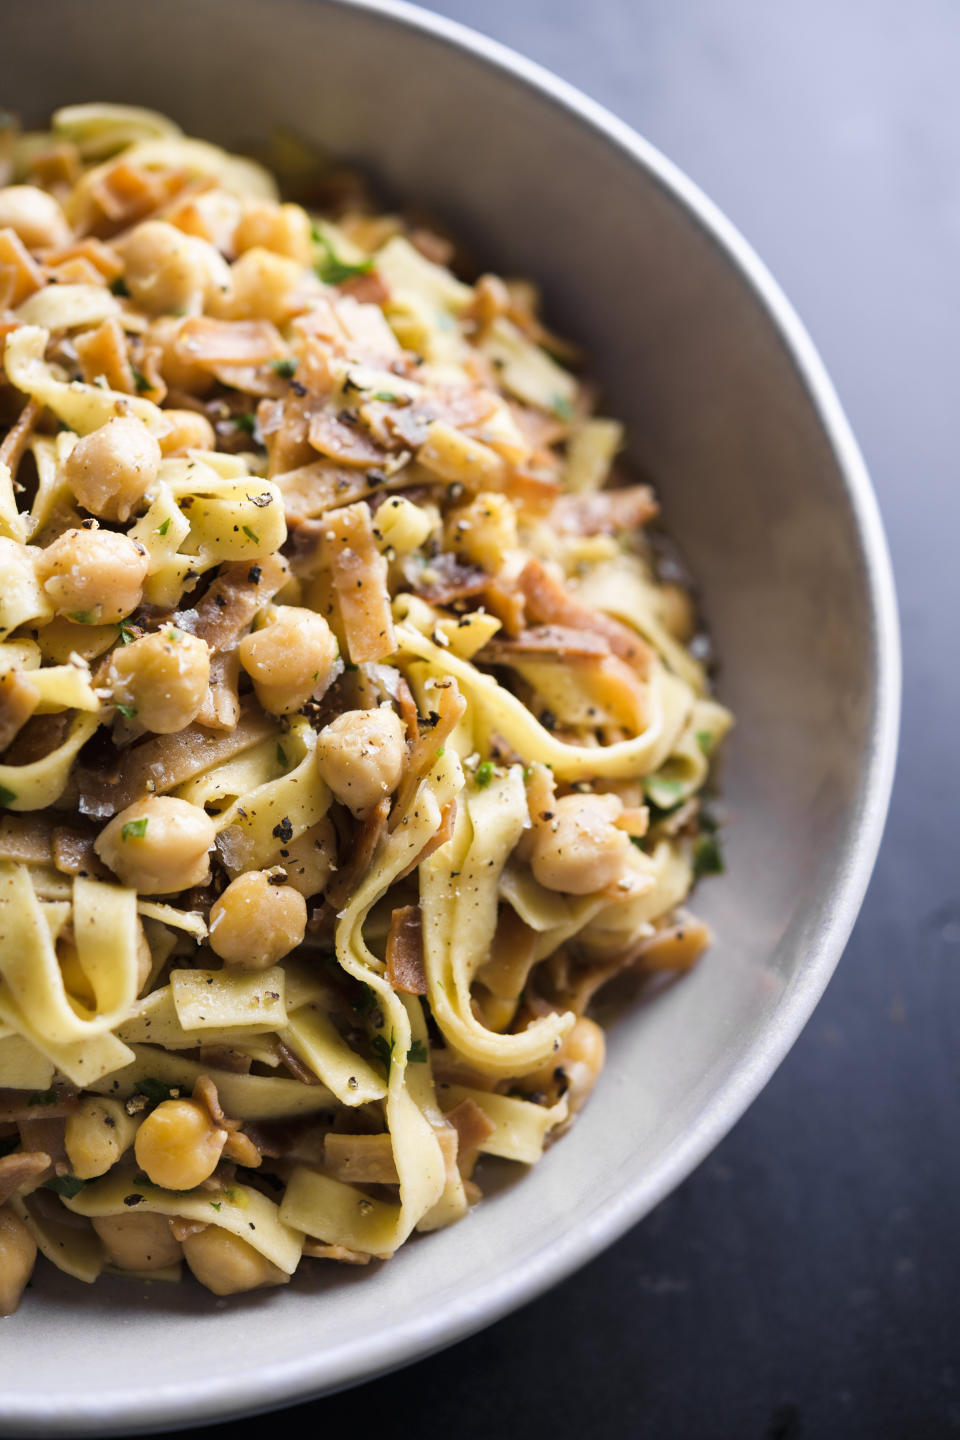 This image released by Milk Street shows a recipe for crispy chickpea pasta. (Milk Street via AP)